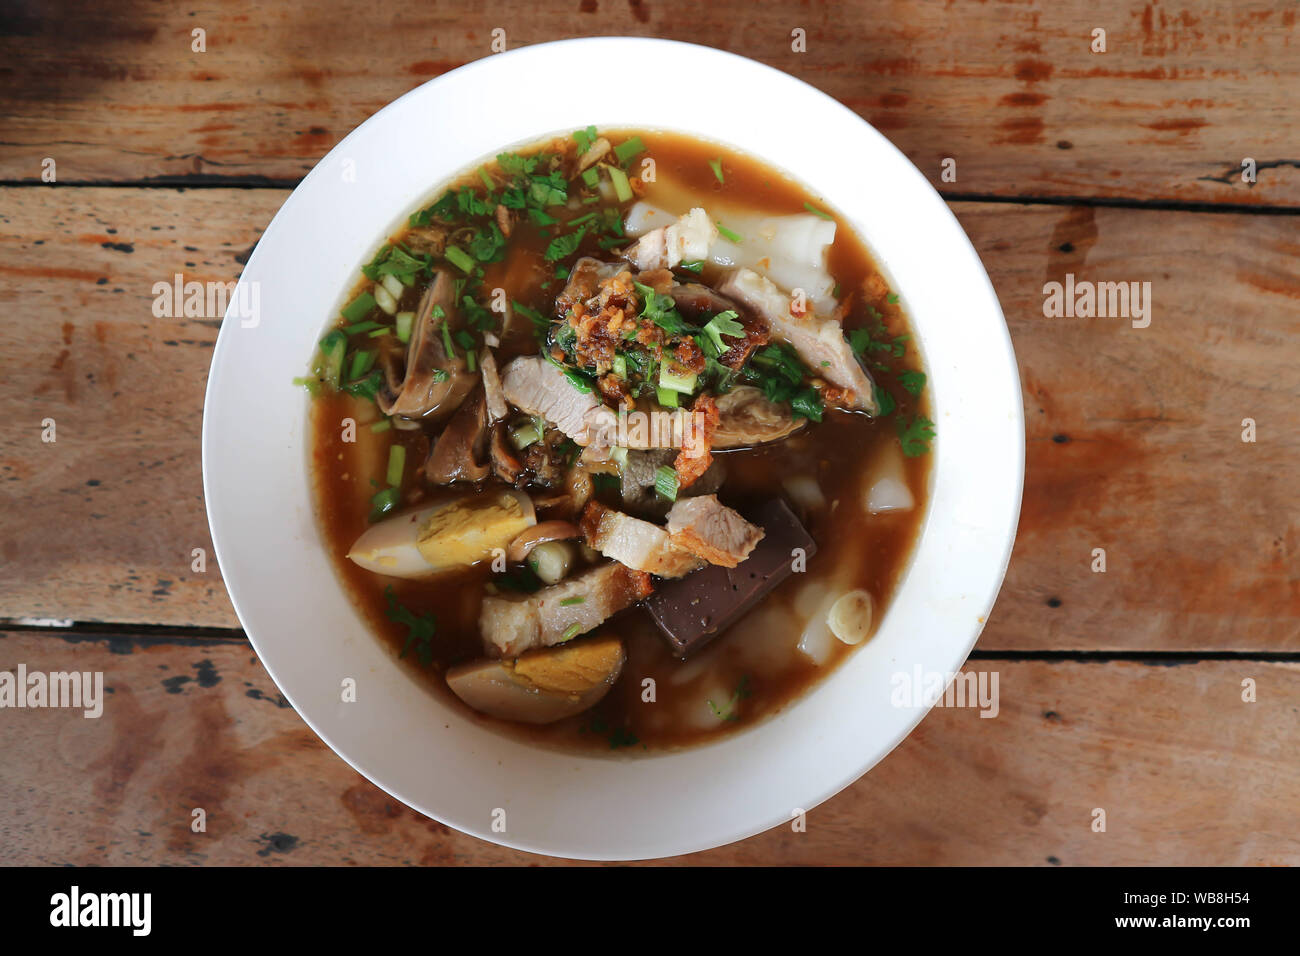 noodle, Chinese noodle or pork and egg noodle Stock Photo